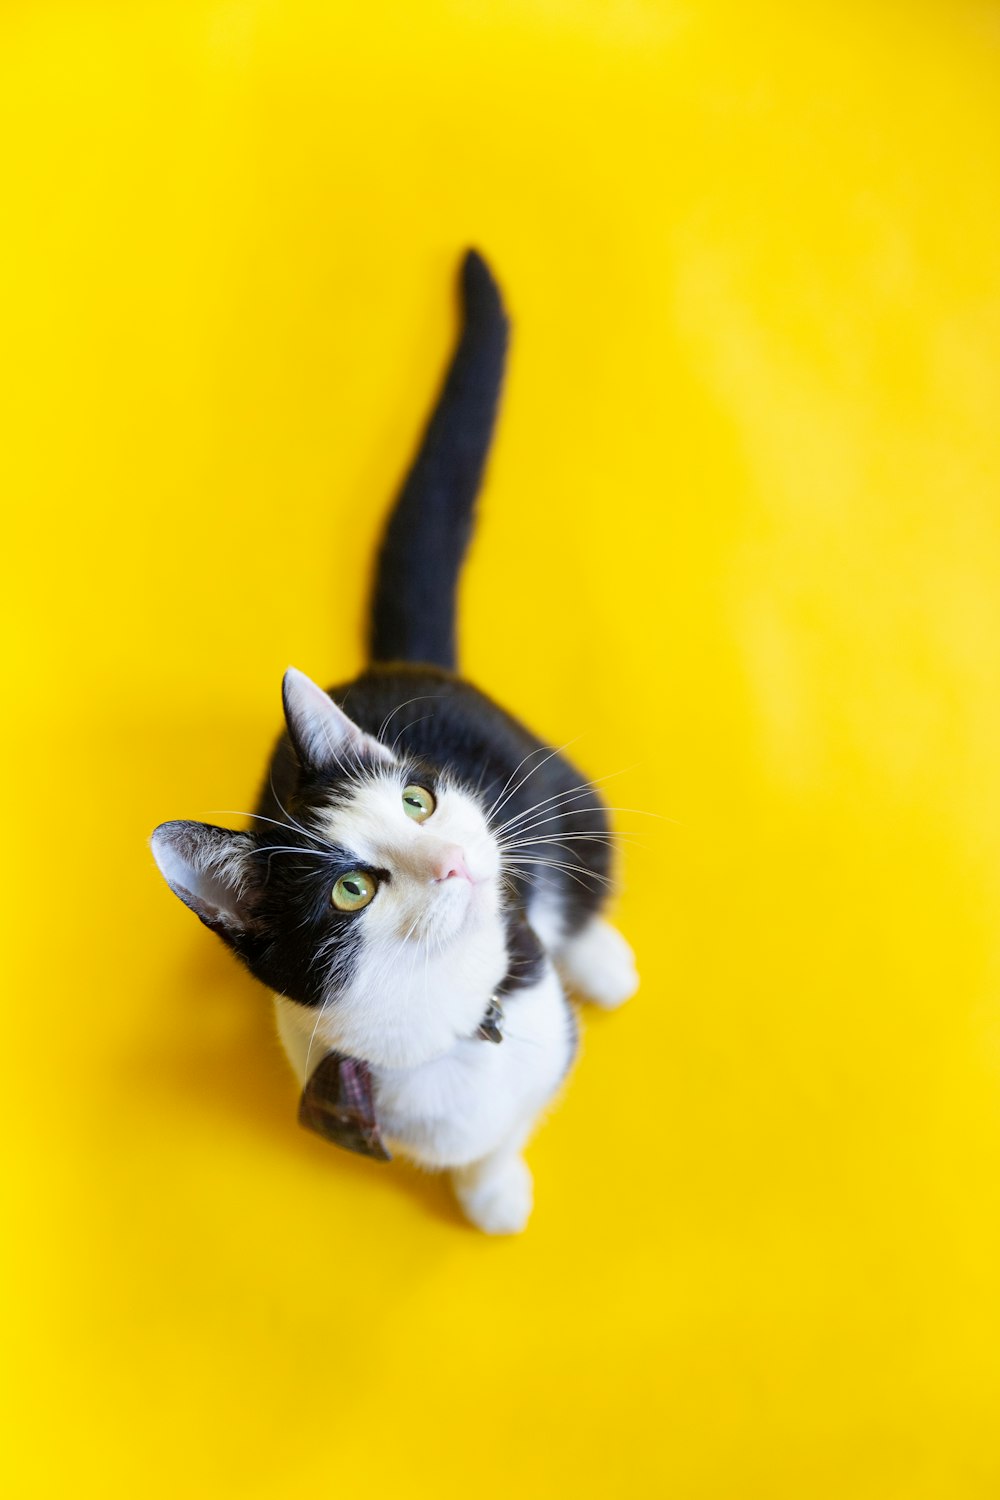 white and black cat on yellow surface